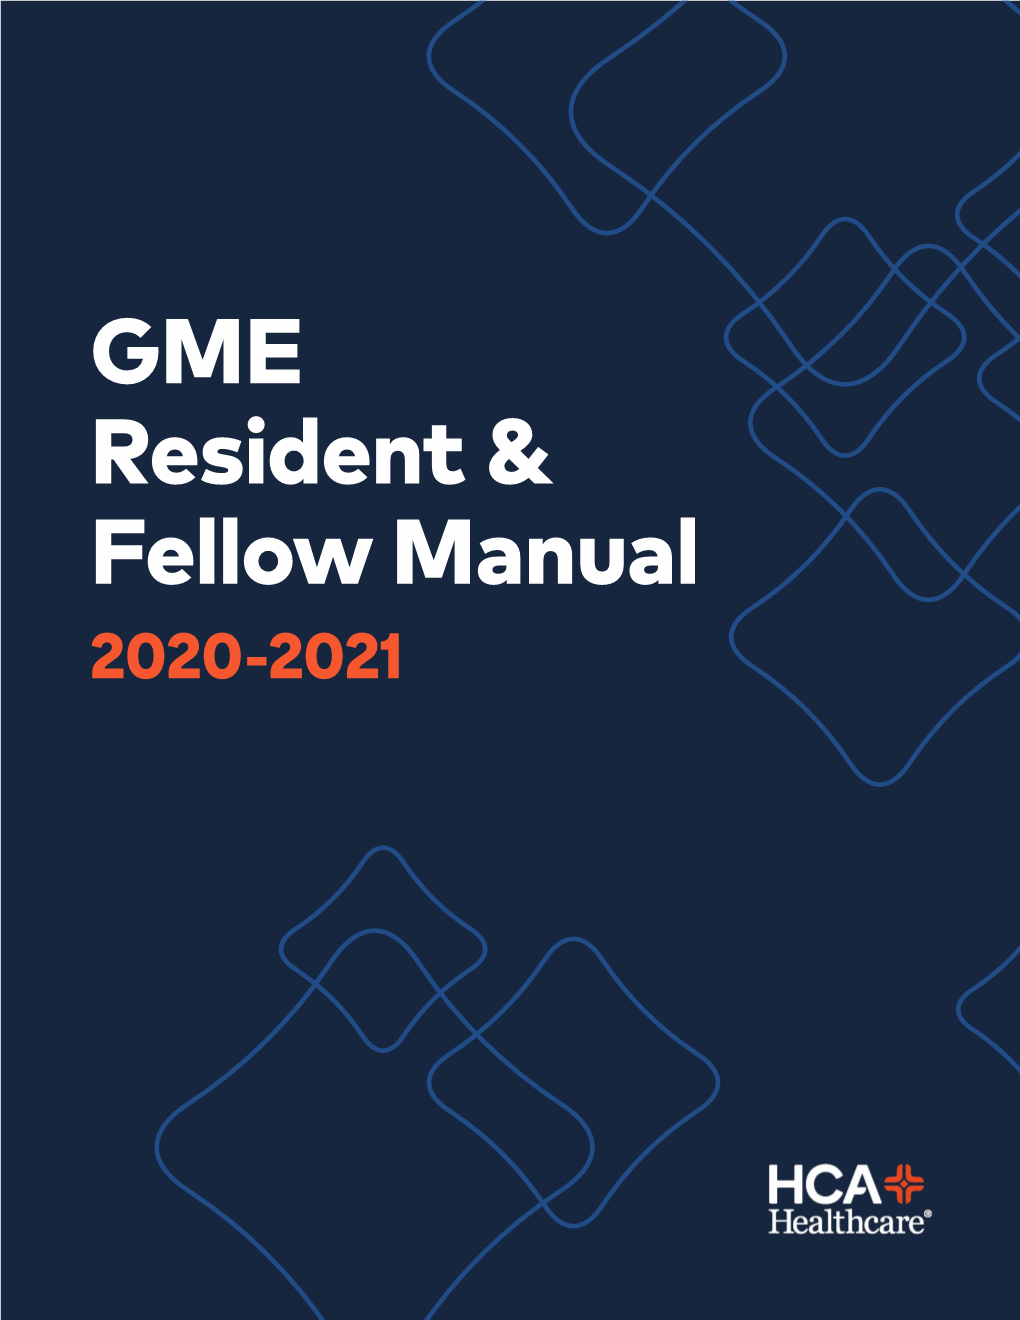 GME Resident & Fellow Manual 2020-2021